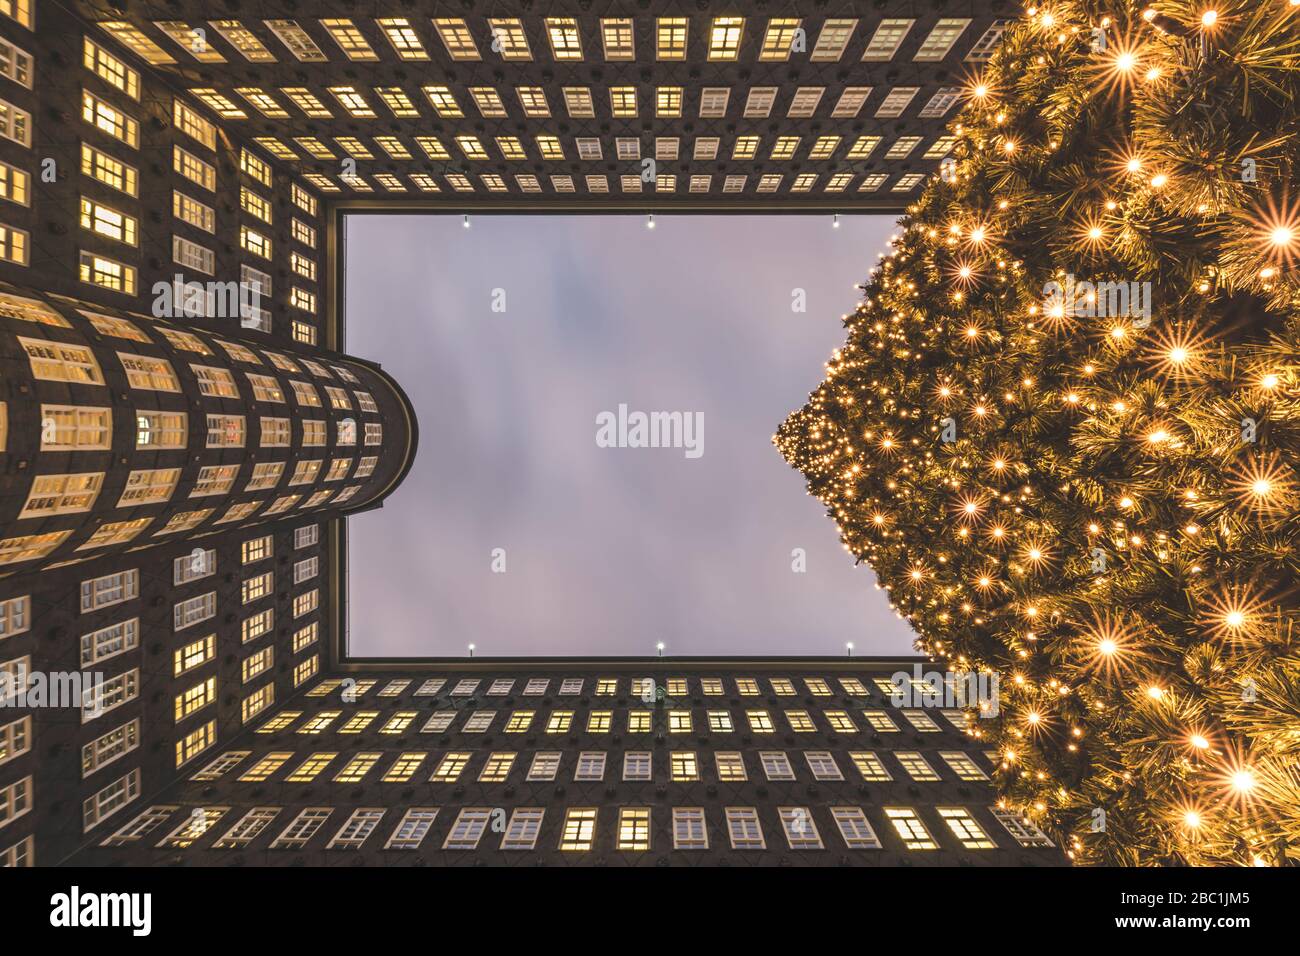 Germany, Hamburg, Directly below view of glowing Christmas tree and exterior of Sprinkenhof building Stock Photo